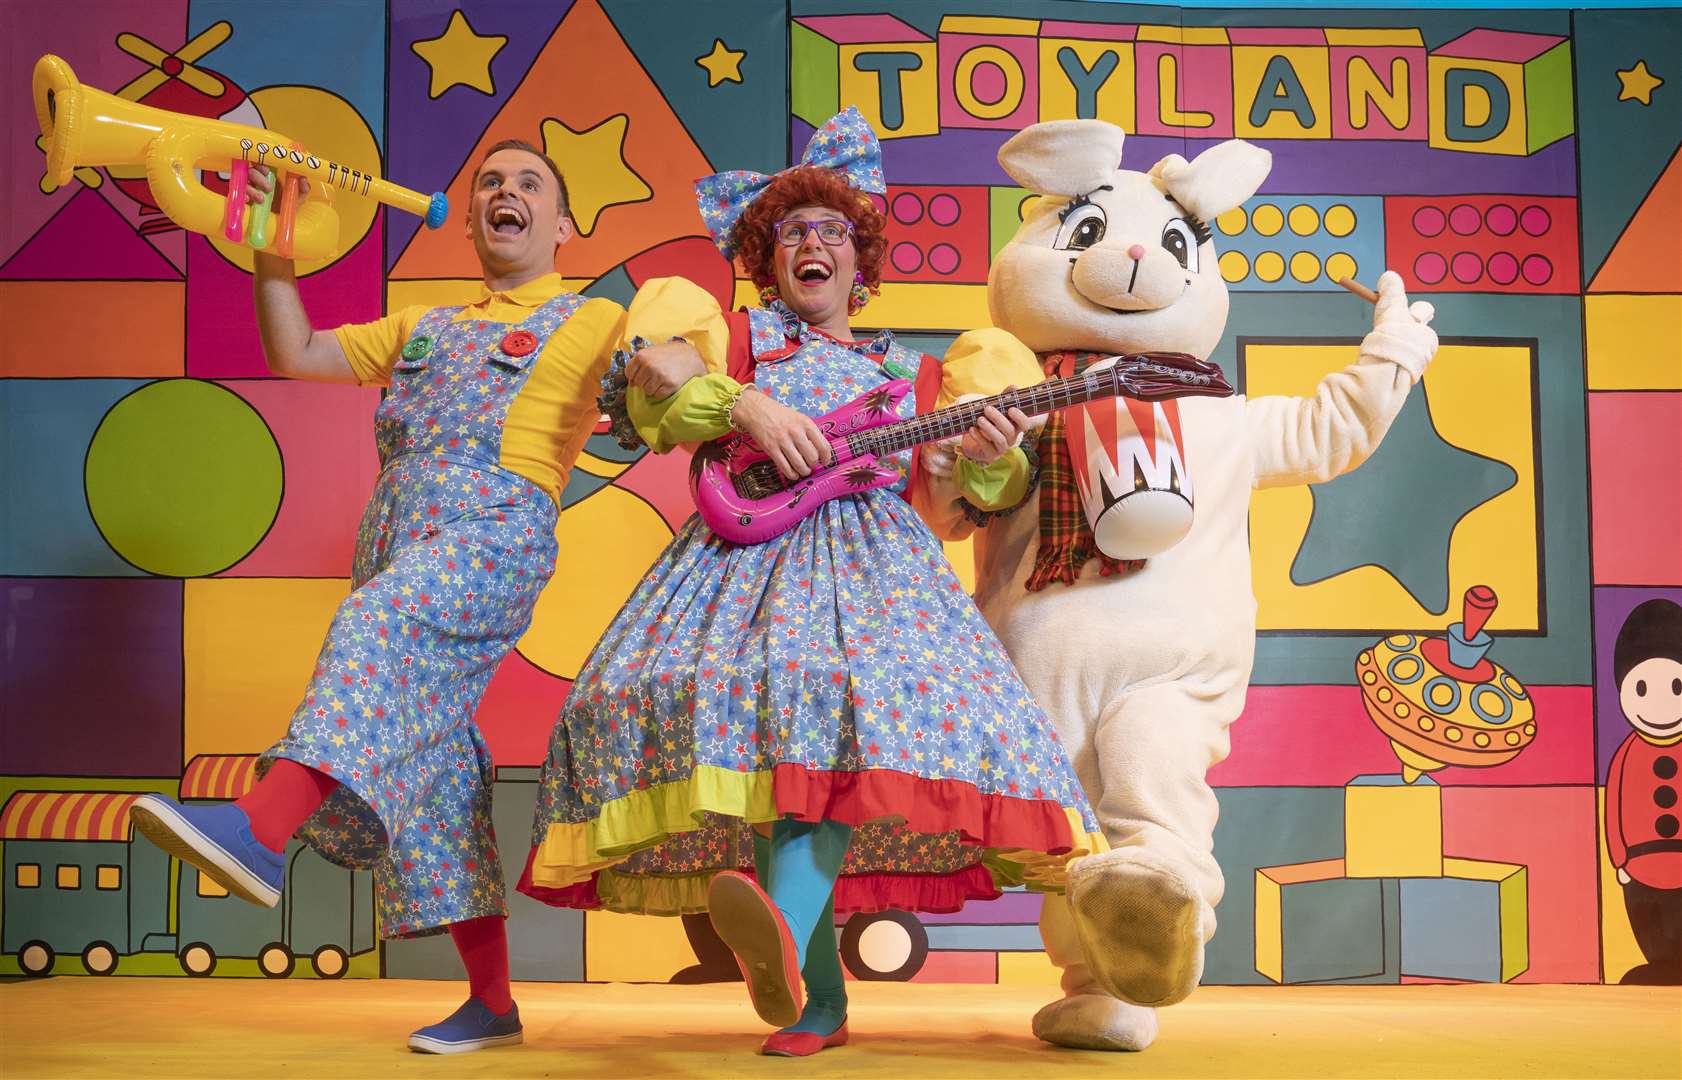 Toyland will be performed at Aberdeen Arts Centre.